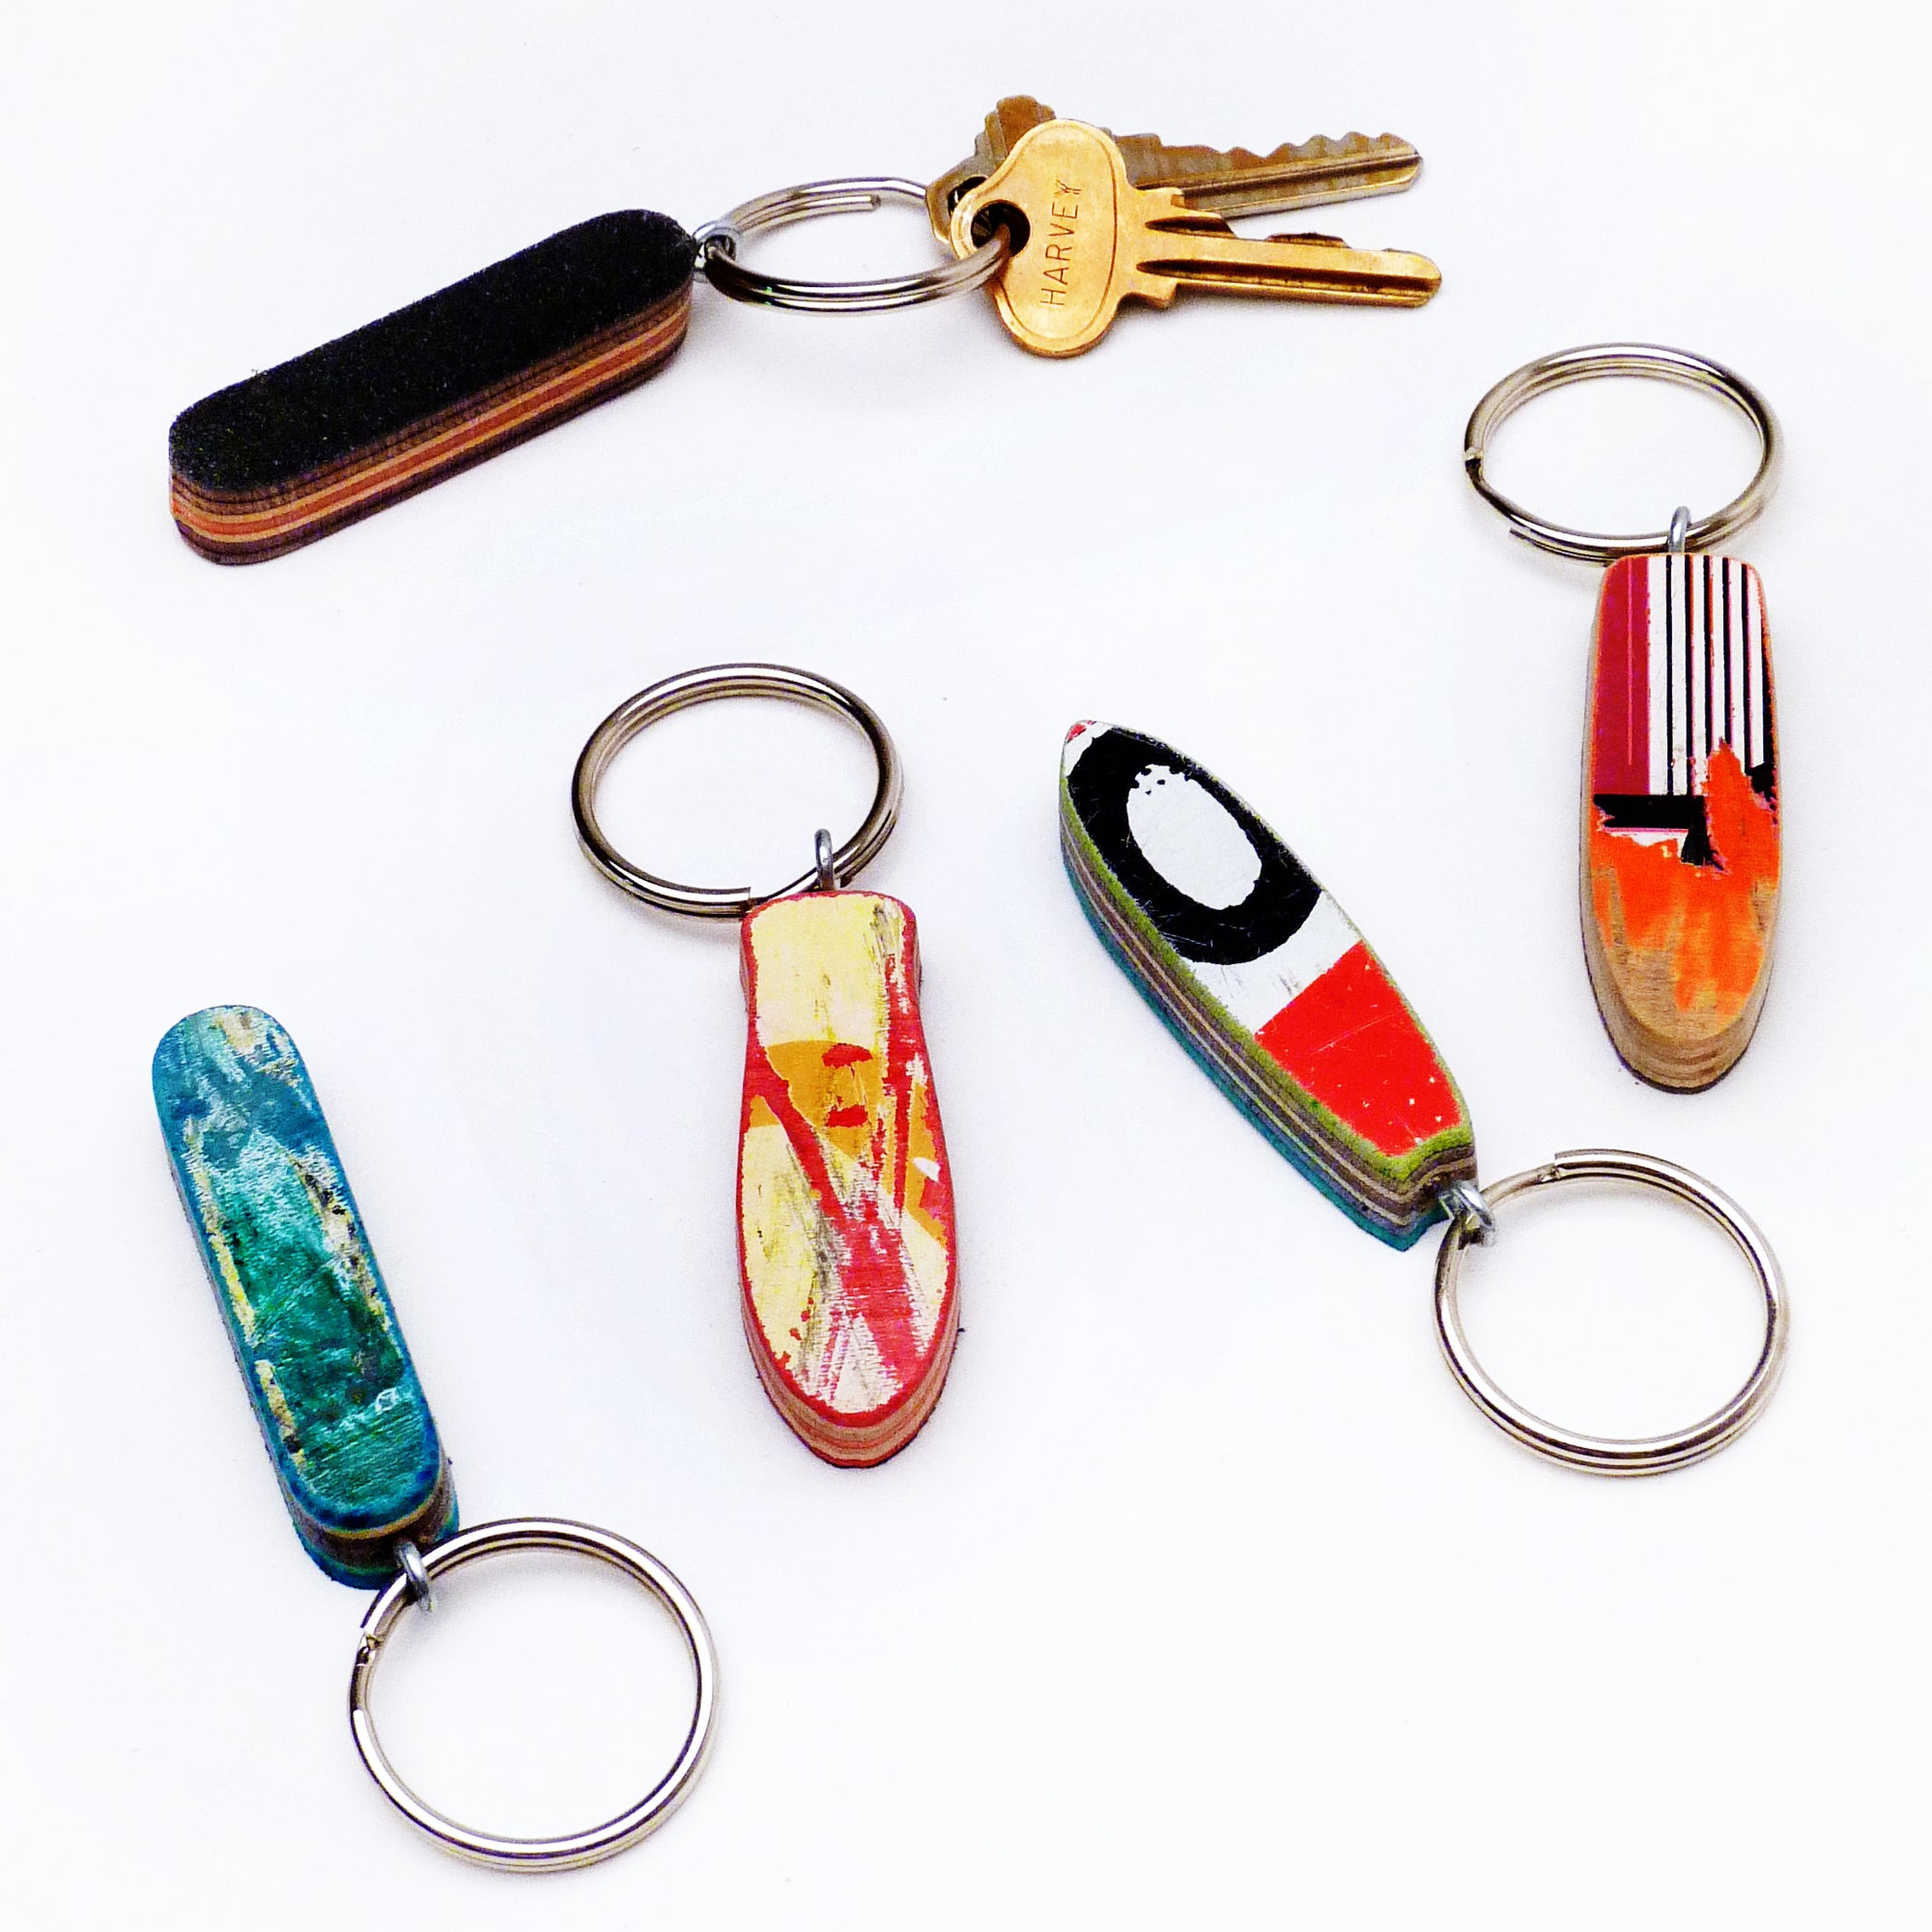 recycled-skateboard-furniture-and-gifts-little-skateboard-keychain